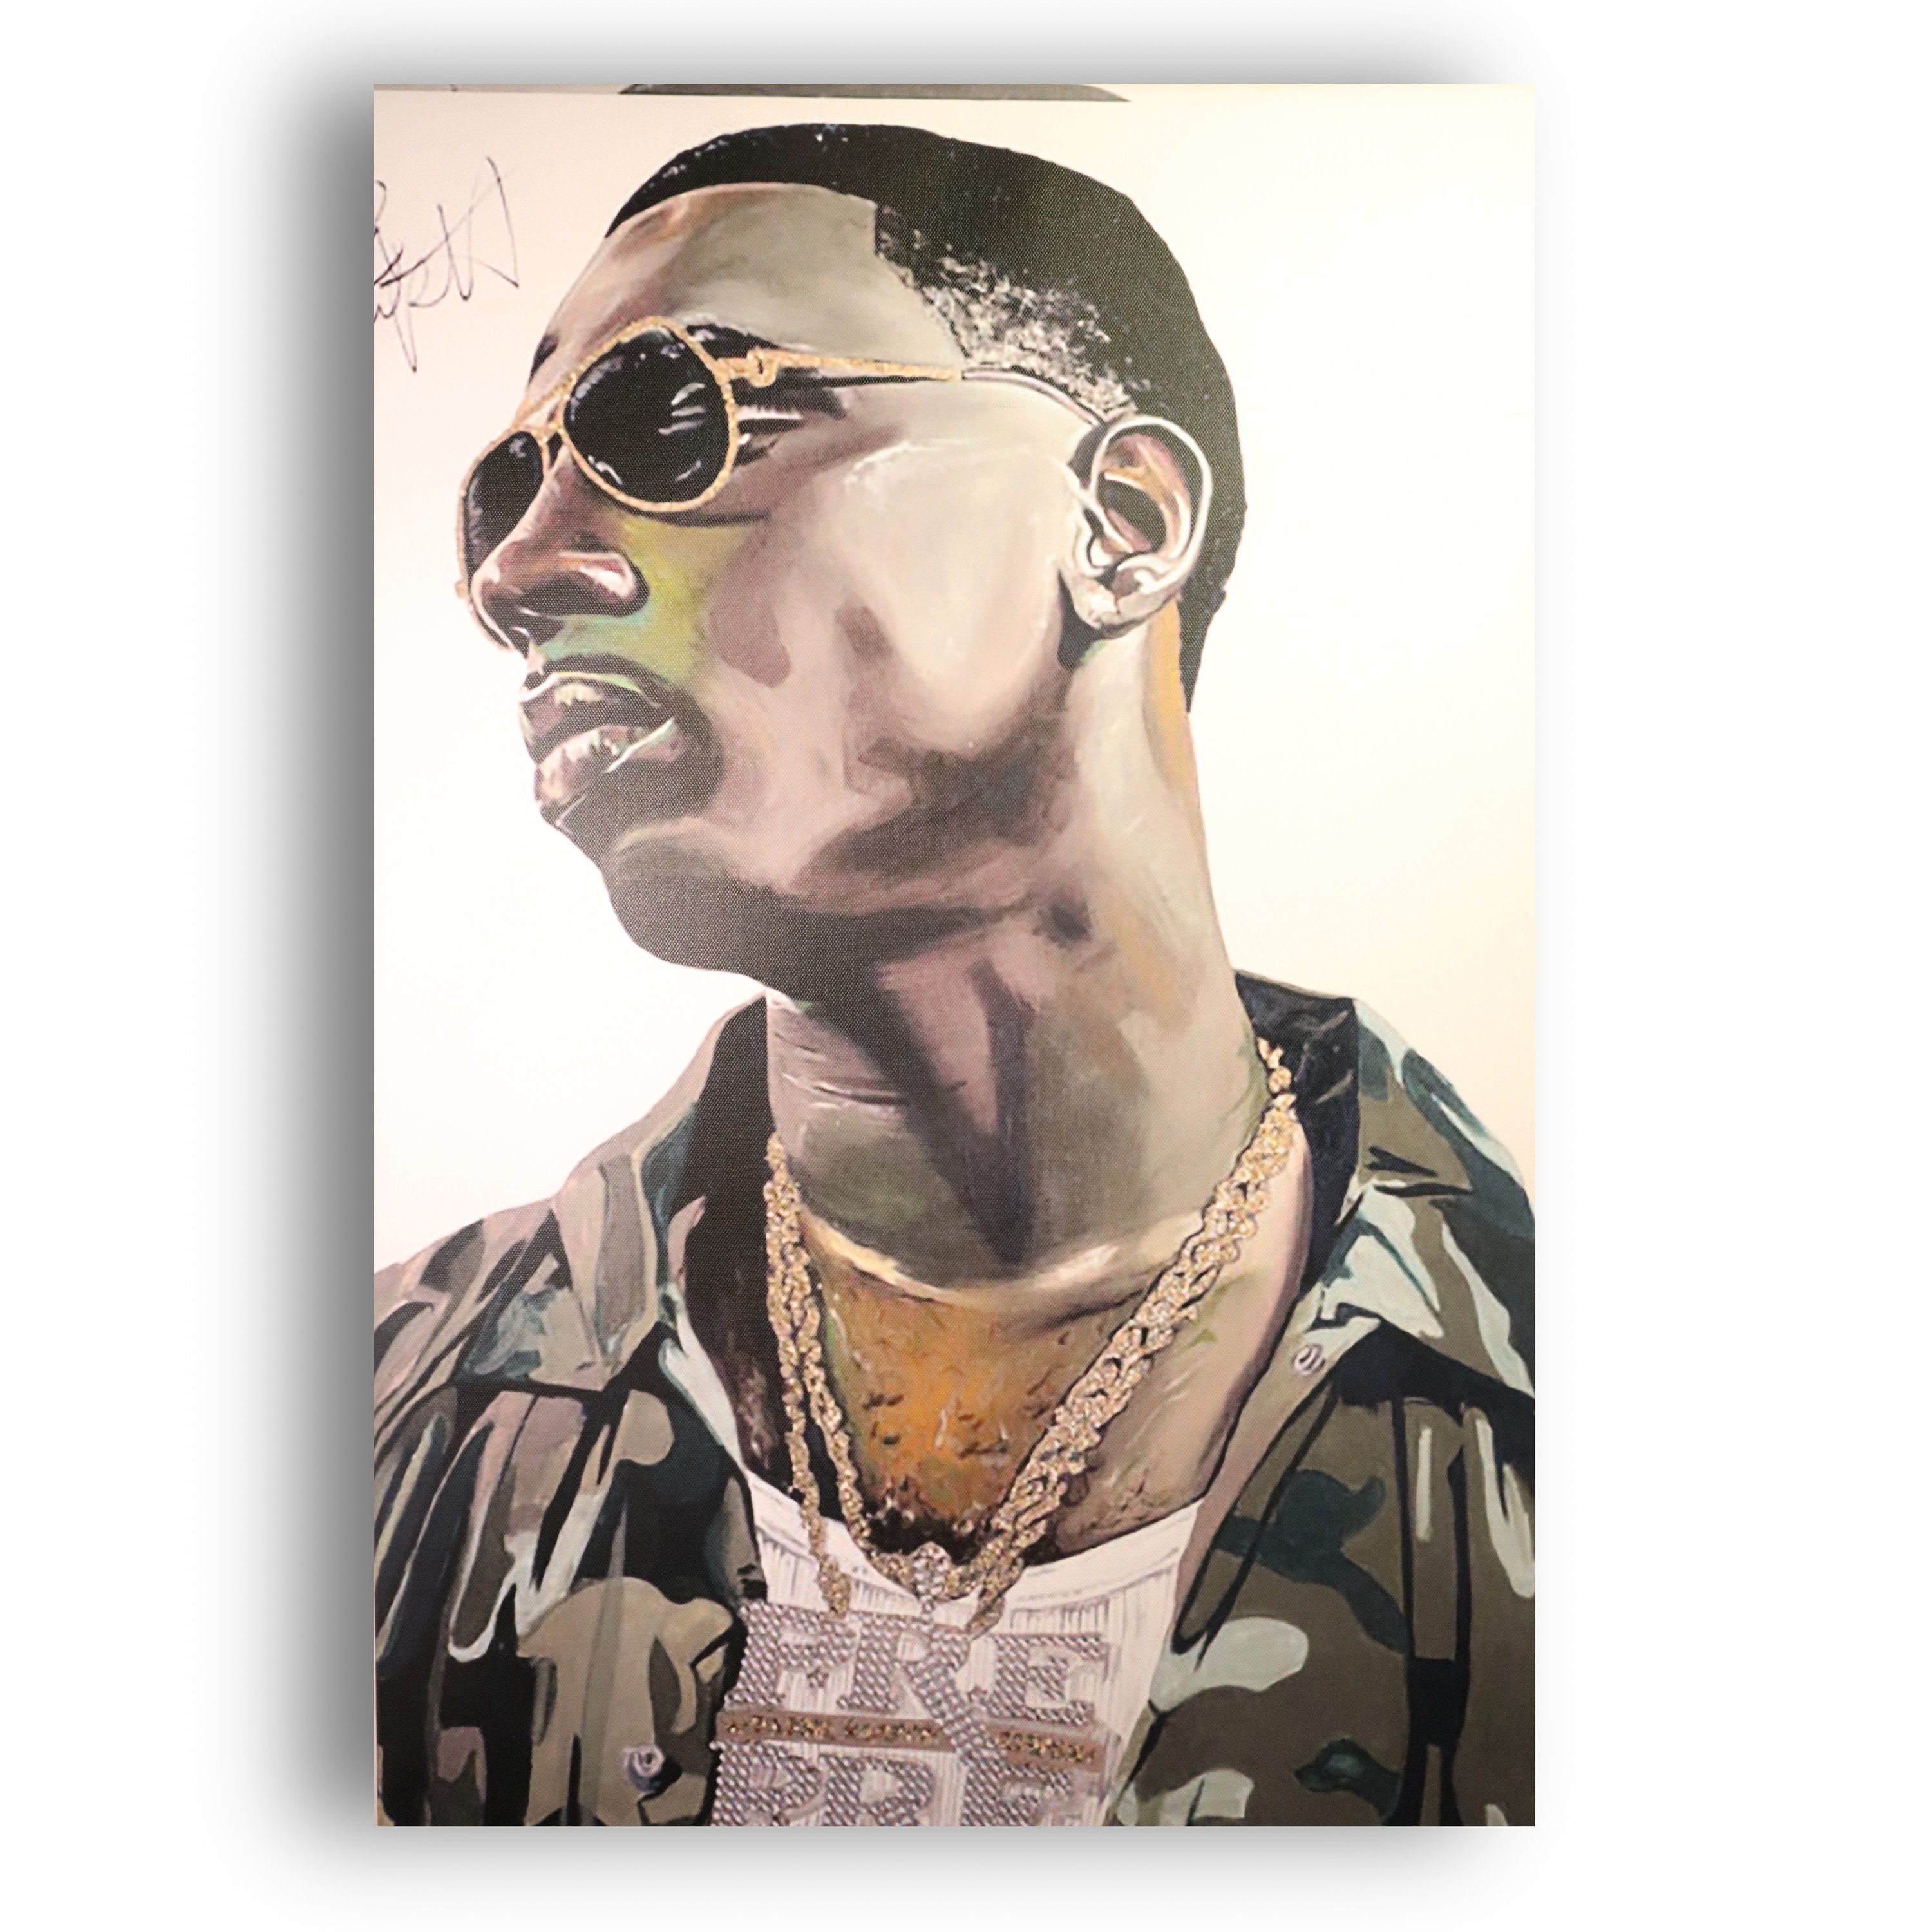 Young Dolph: The Most Underappreciated Rapper of All Time